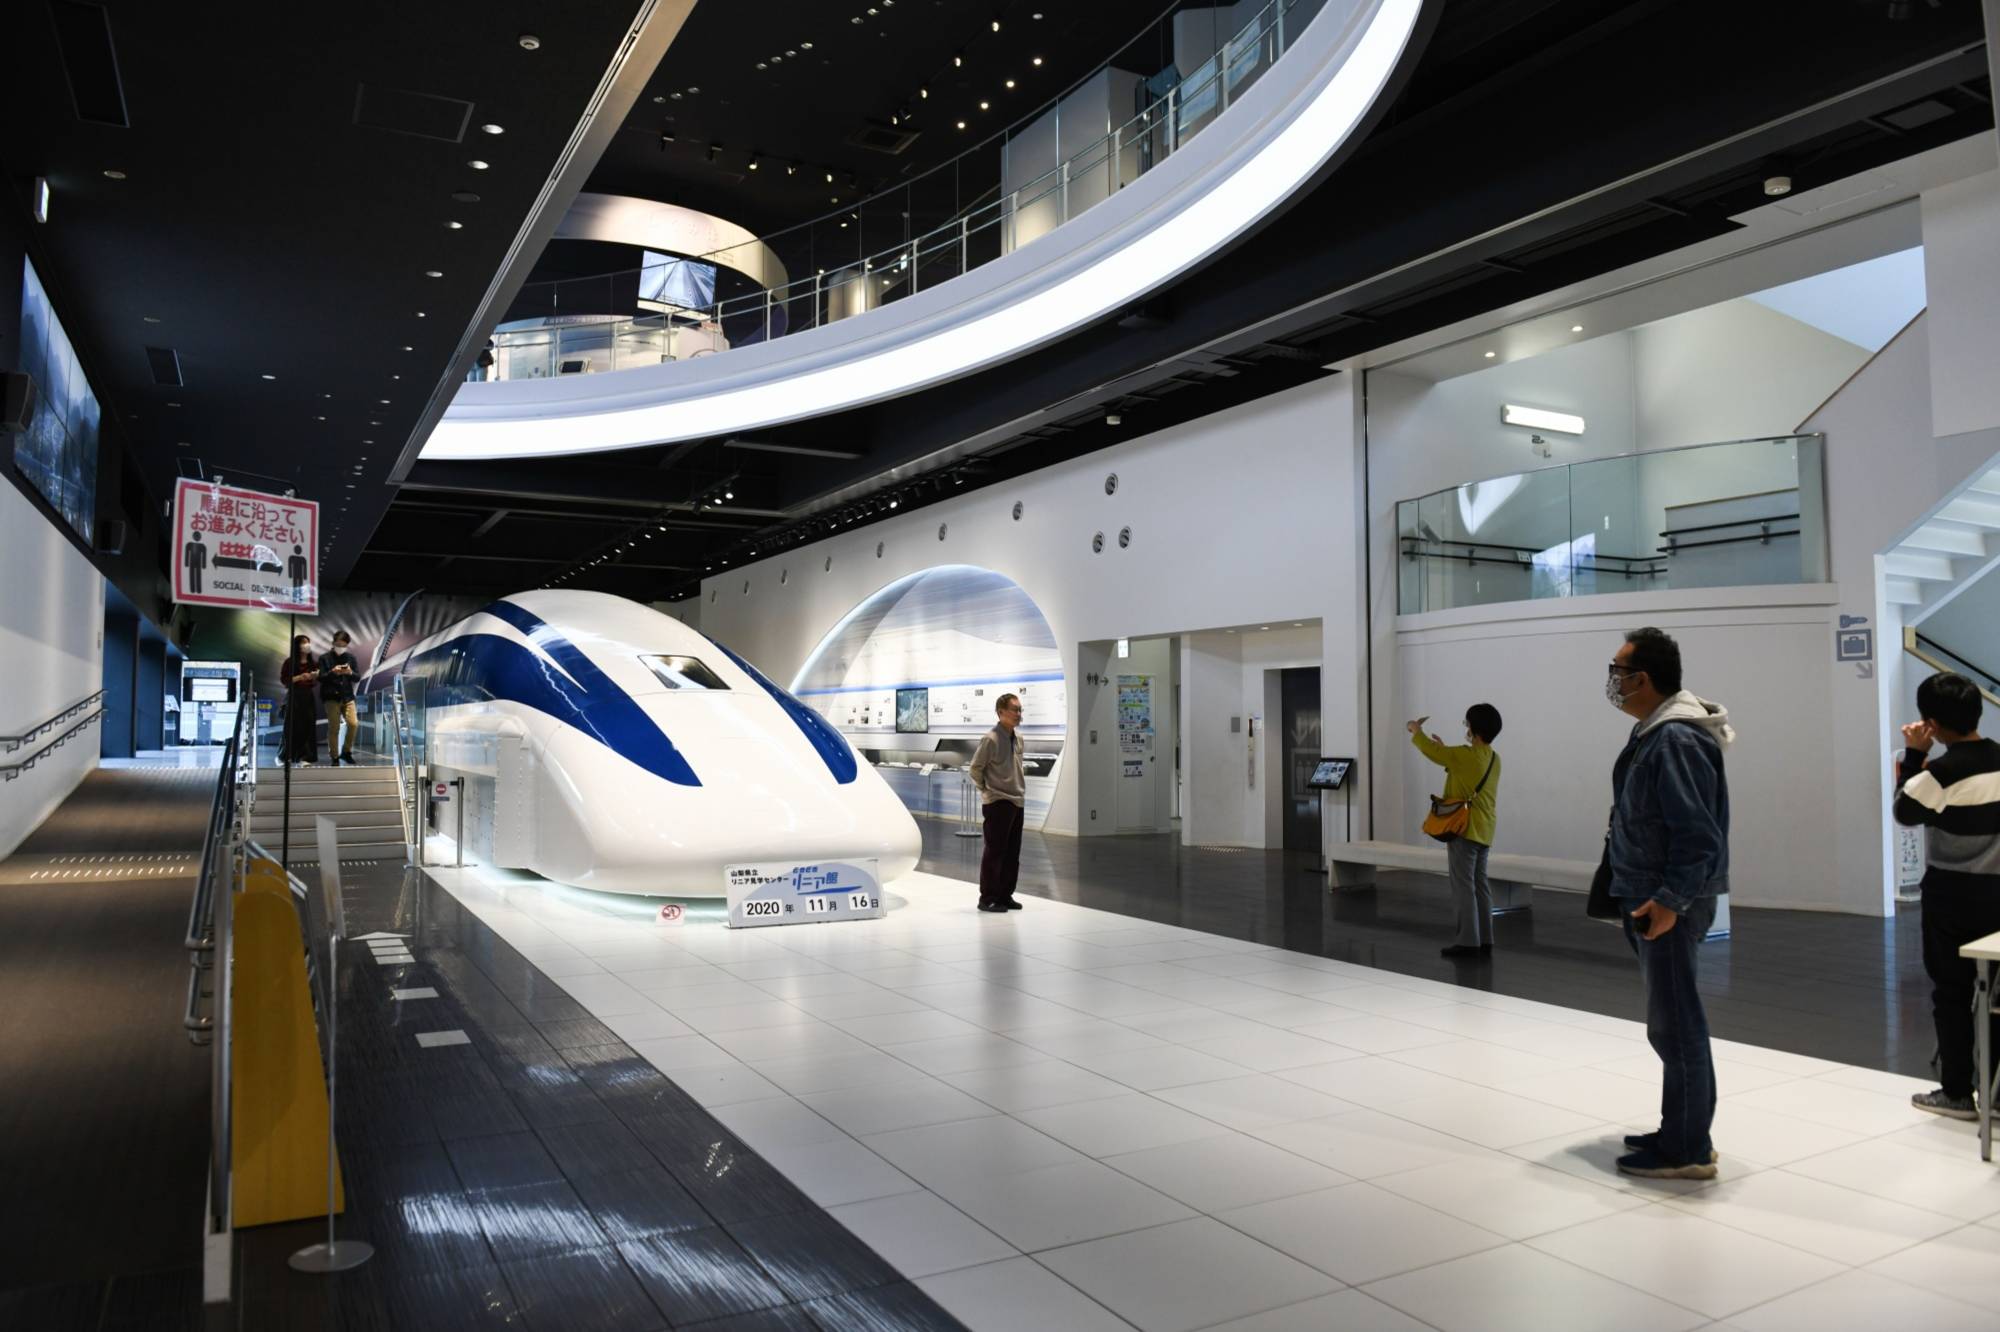 A maglev test vehicle is on display at an exhibition center in Yamanashi Prefecture. | BLOOMBERG